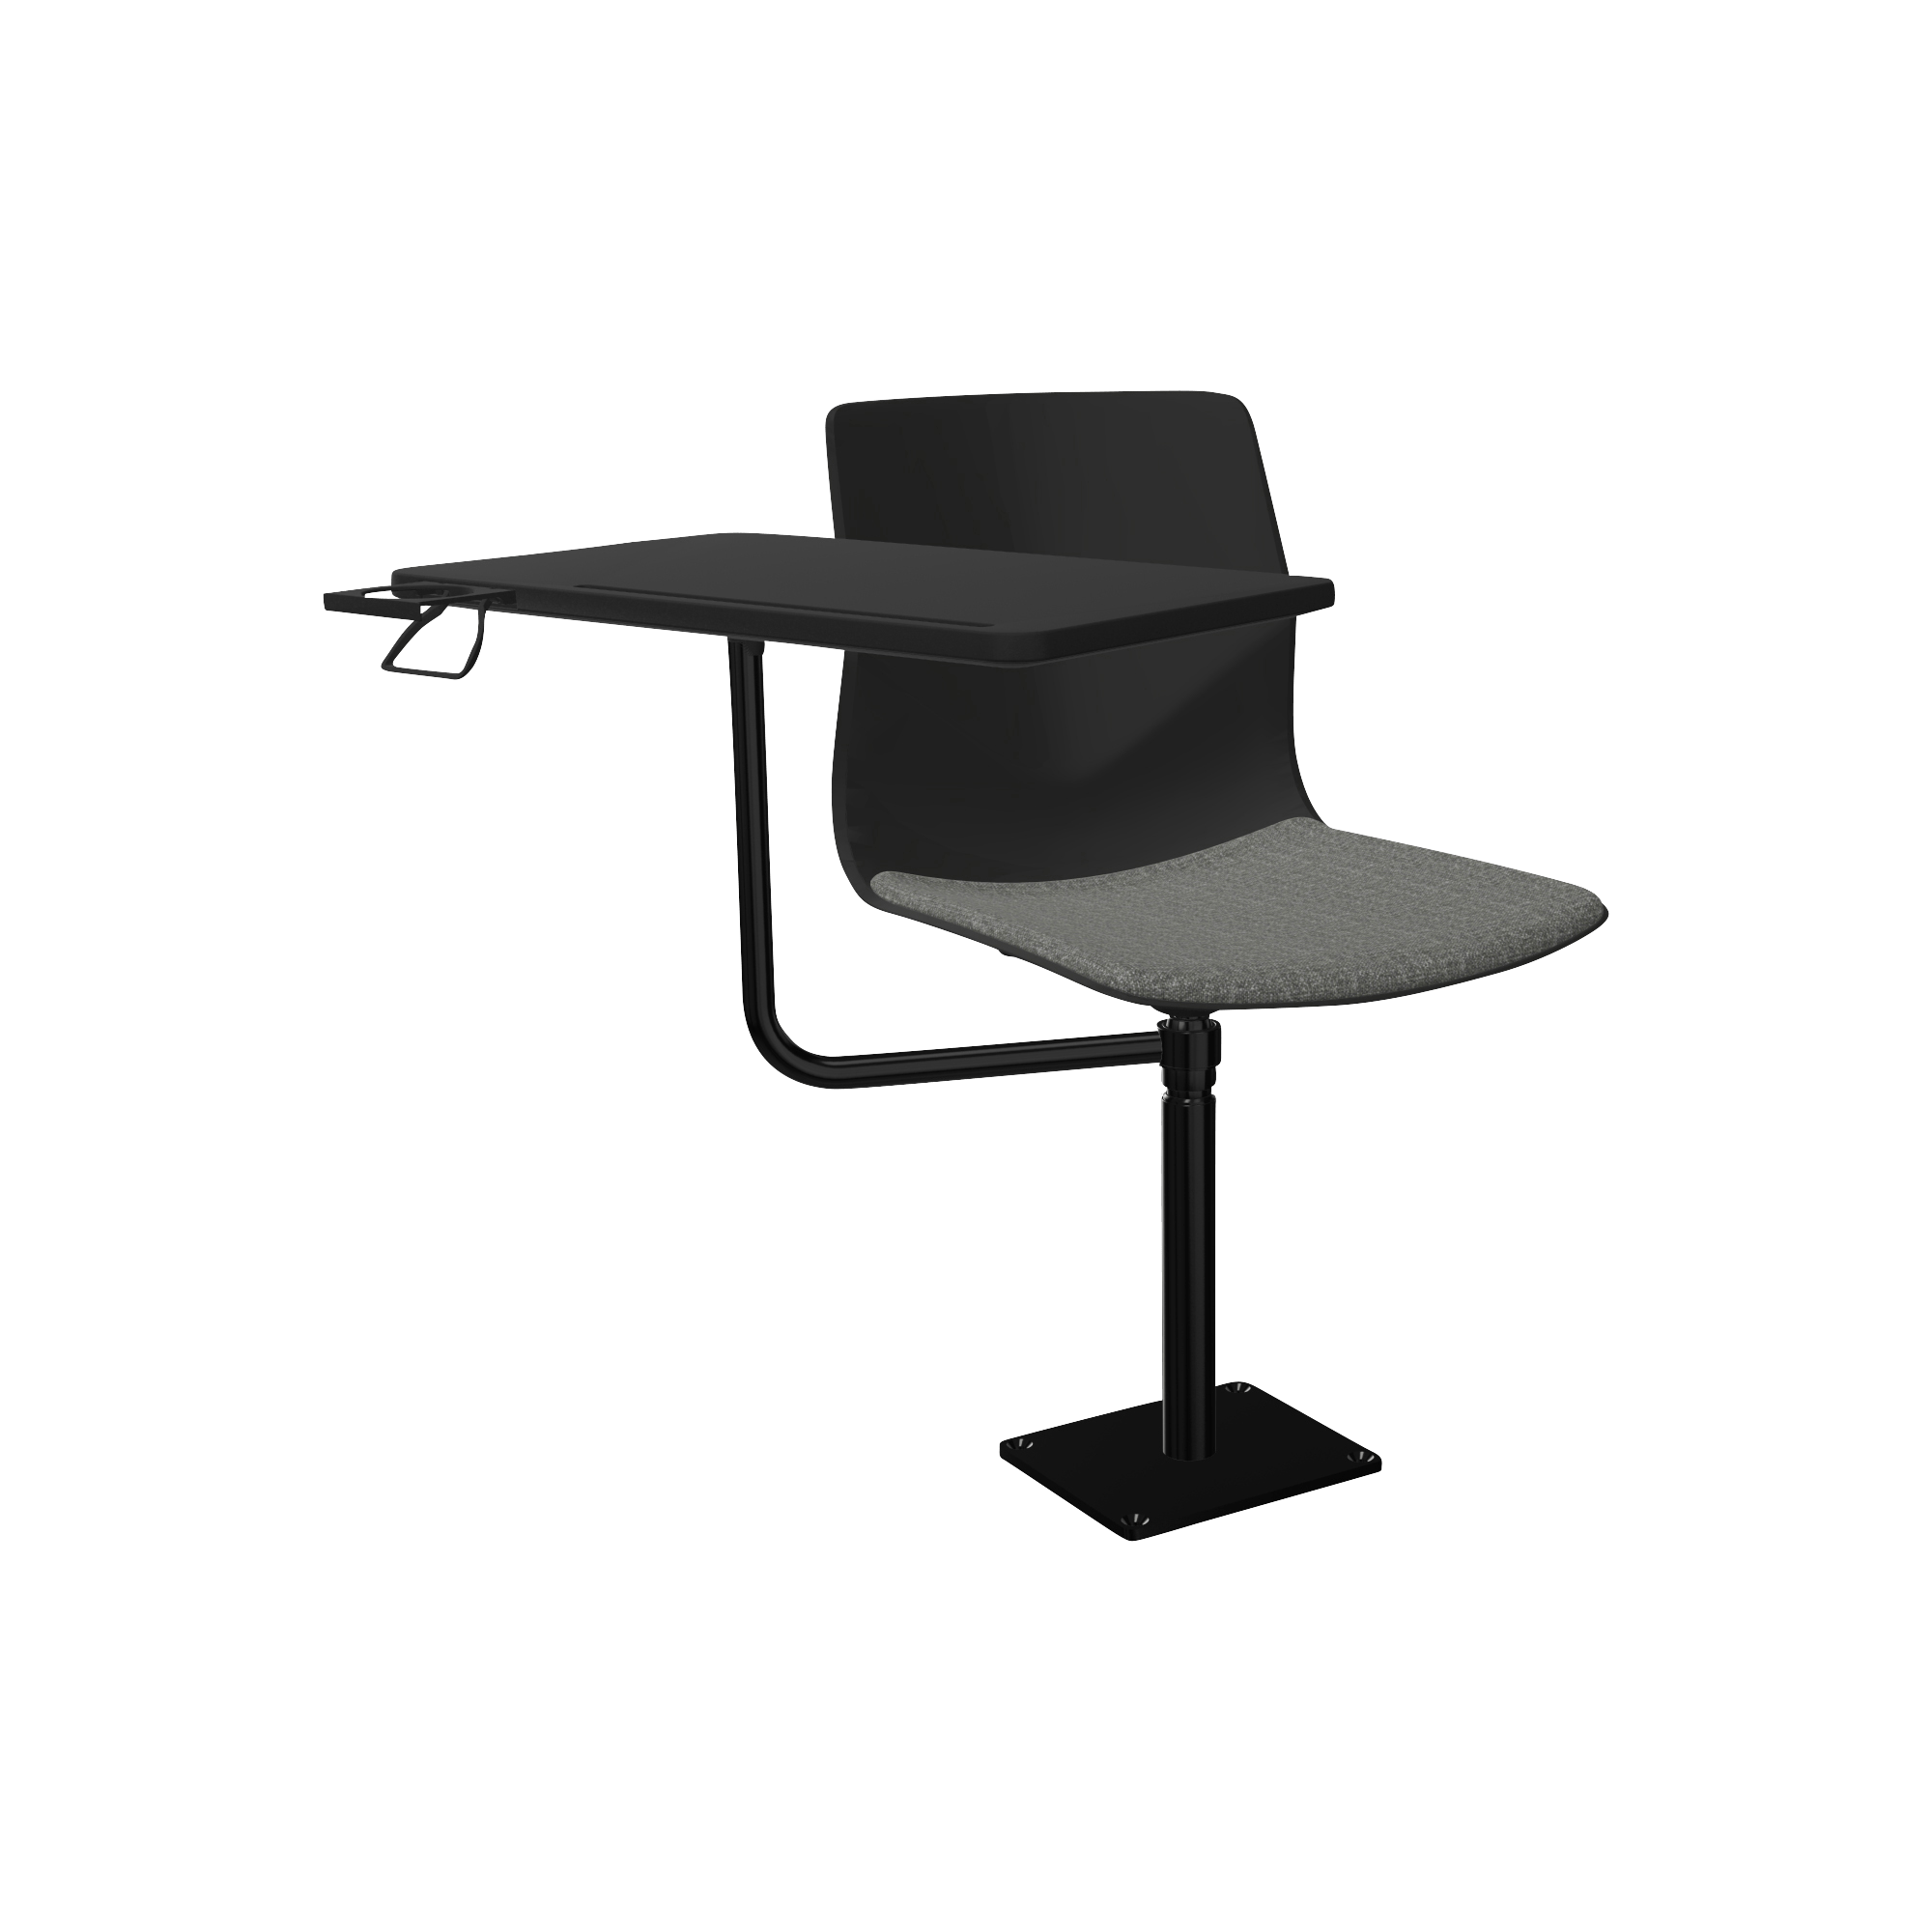 Black pedestal lecture chair with work desk attached